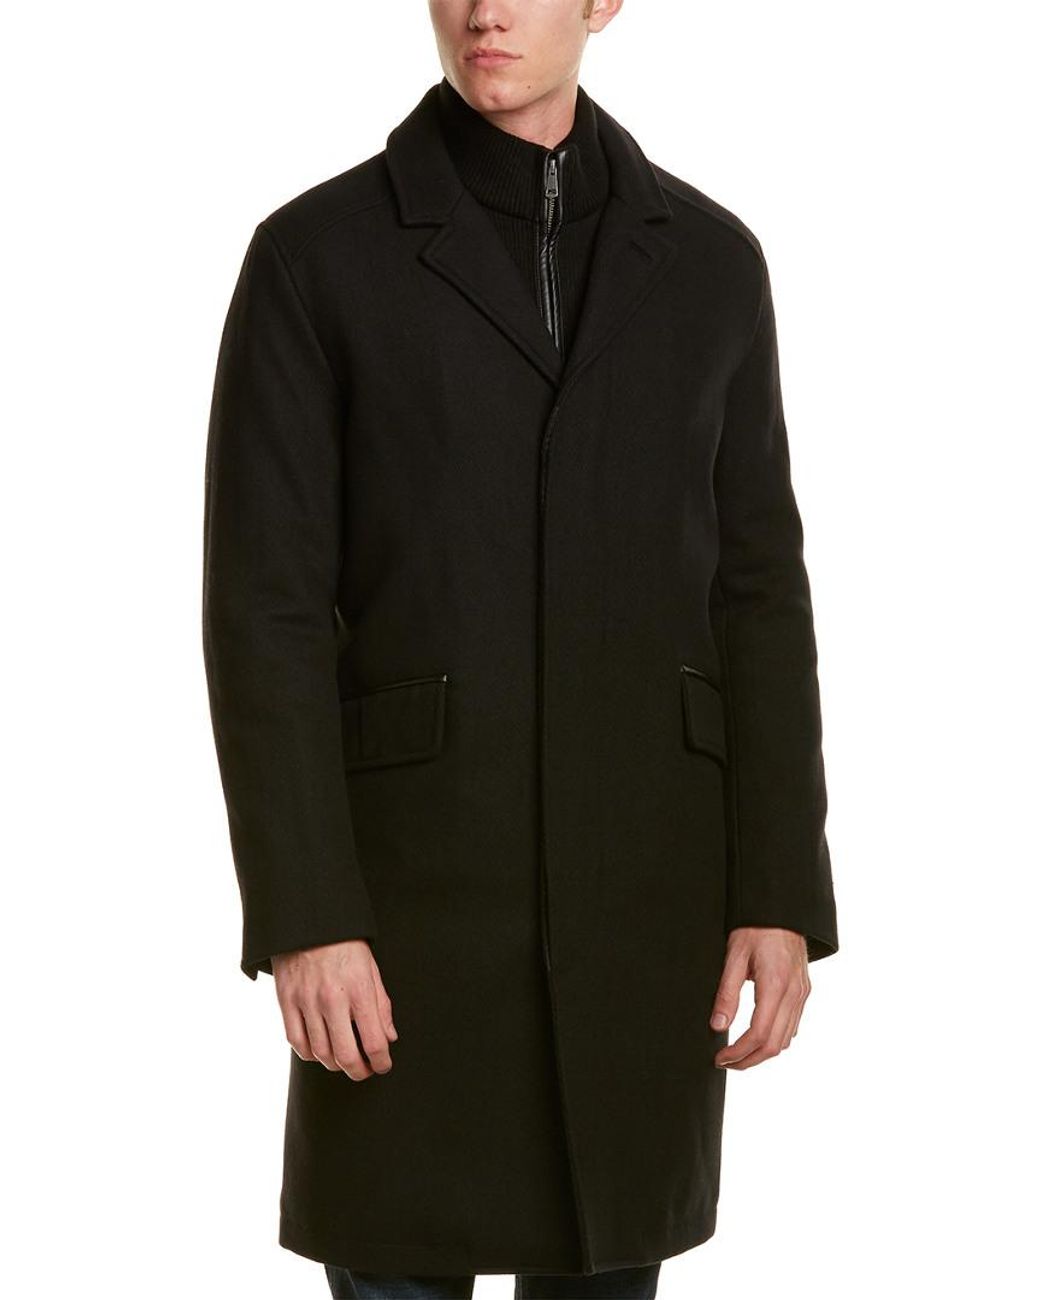 Cole Haan Twill Wool-blend Coat in Black for Men - Save 6% - Lyst